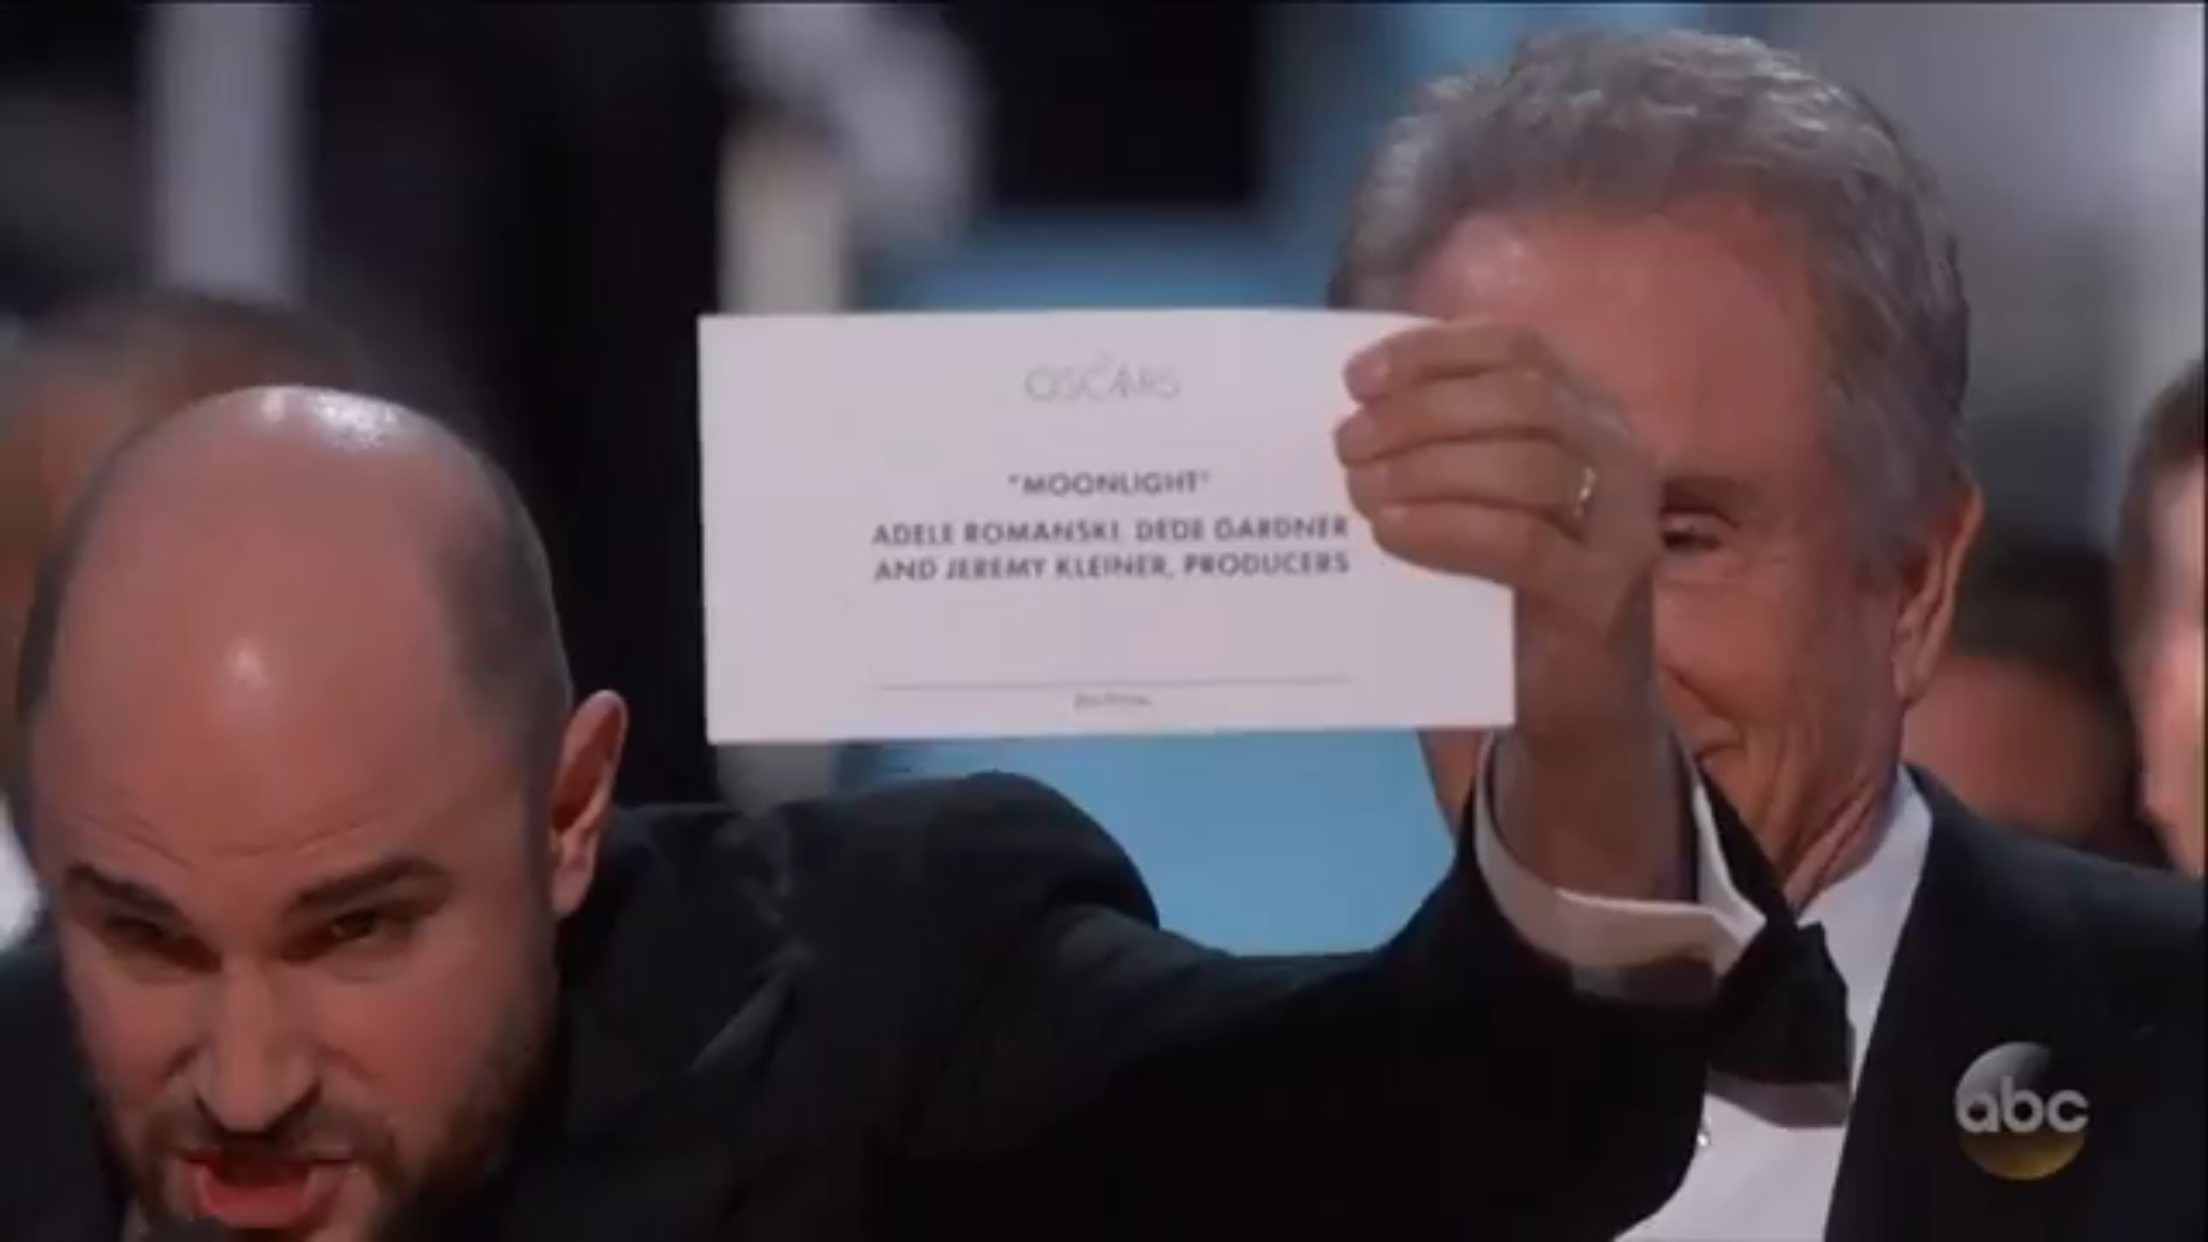 This happened at the Oscars by Jimmy Kimmel